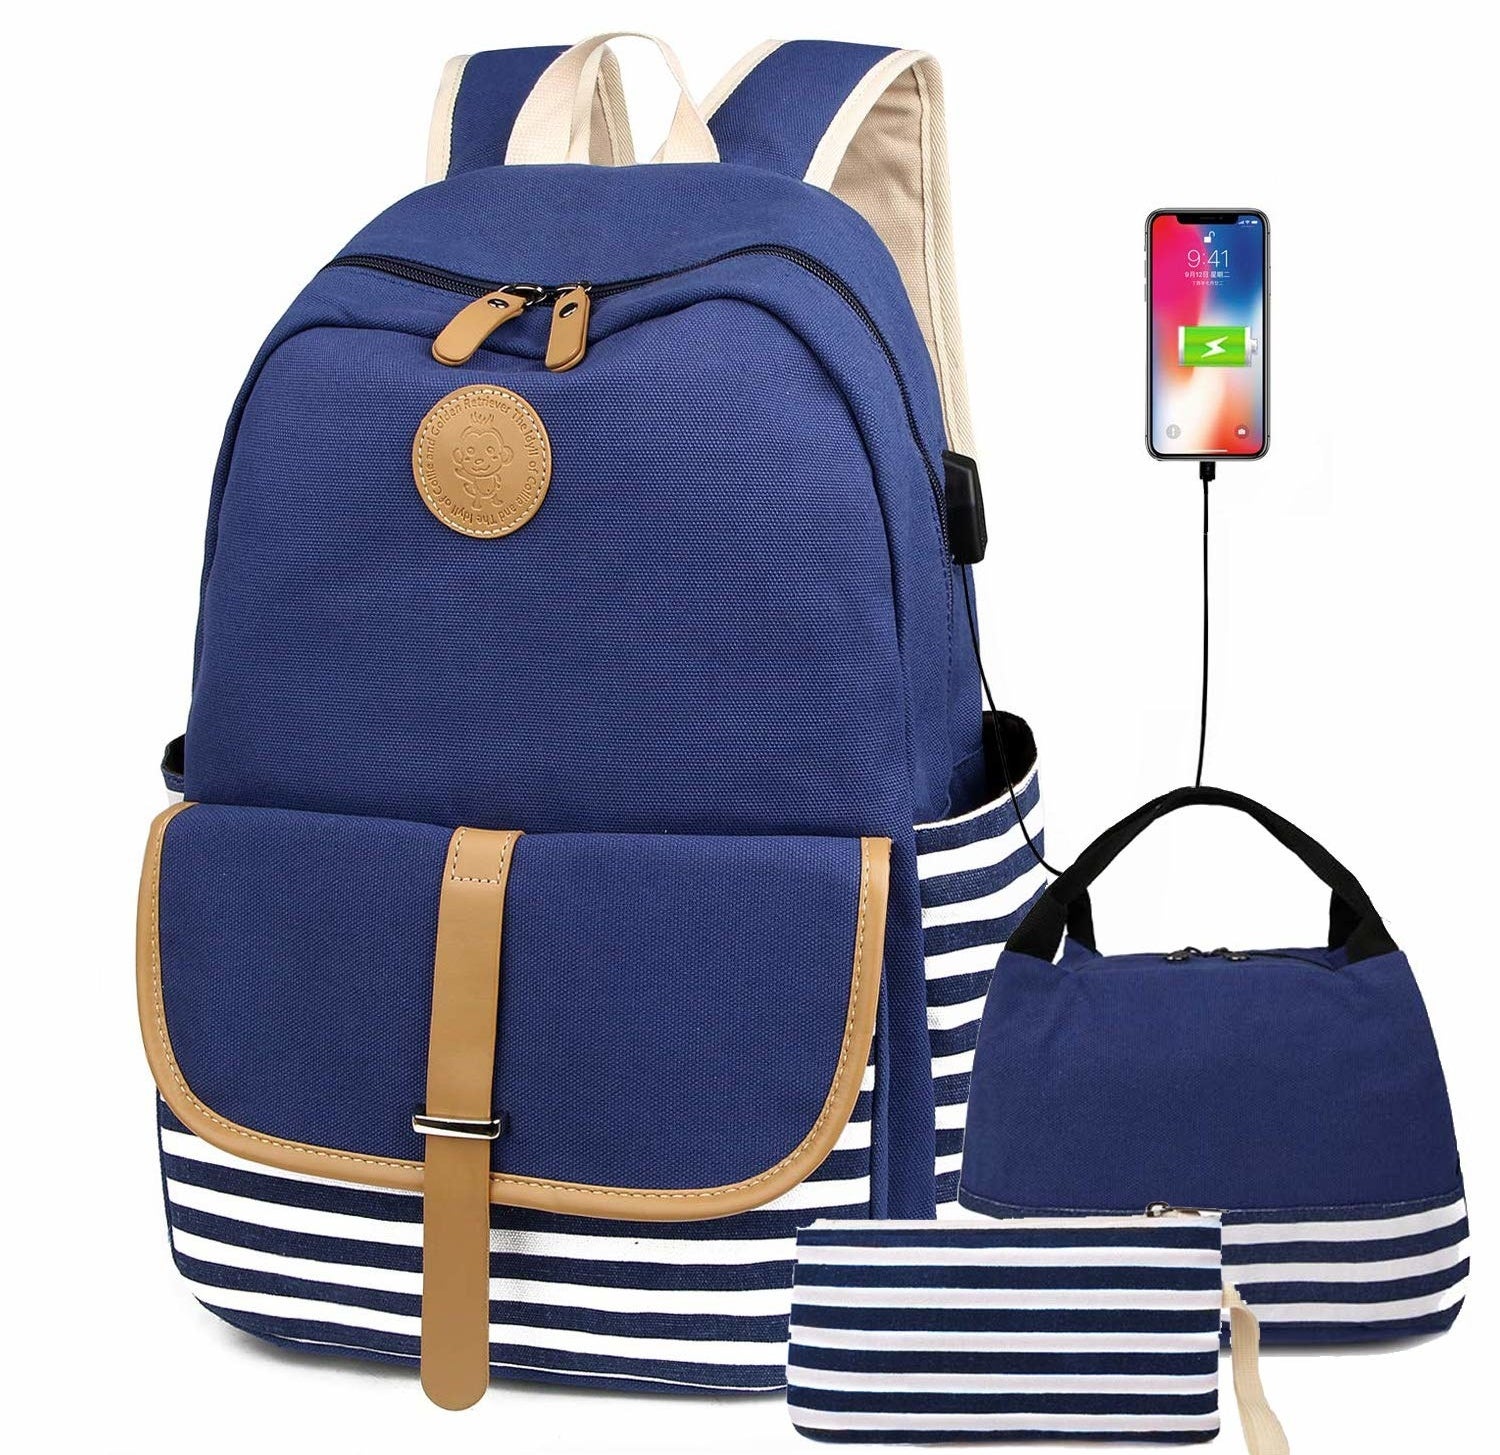 21 Of The Best Backpacks You Can Get On Amazon